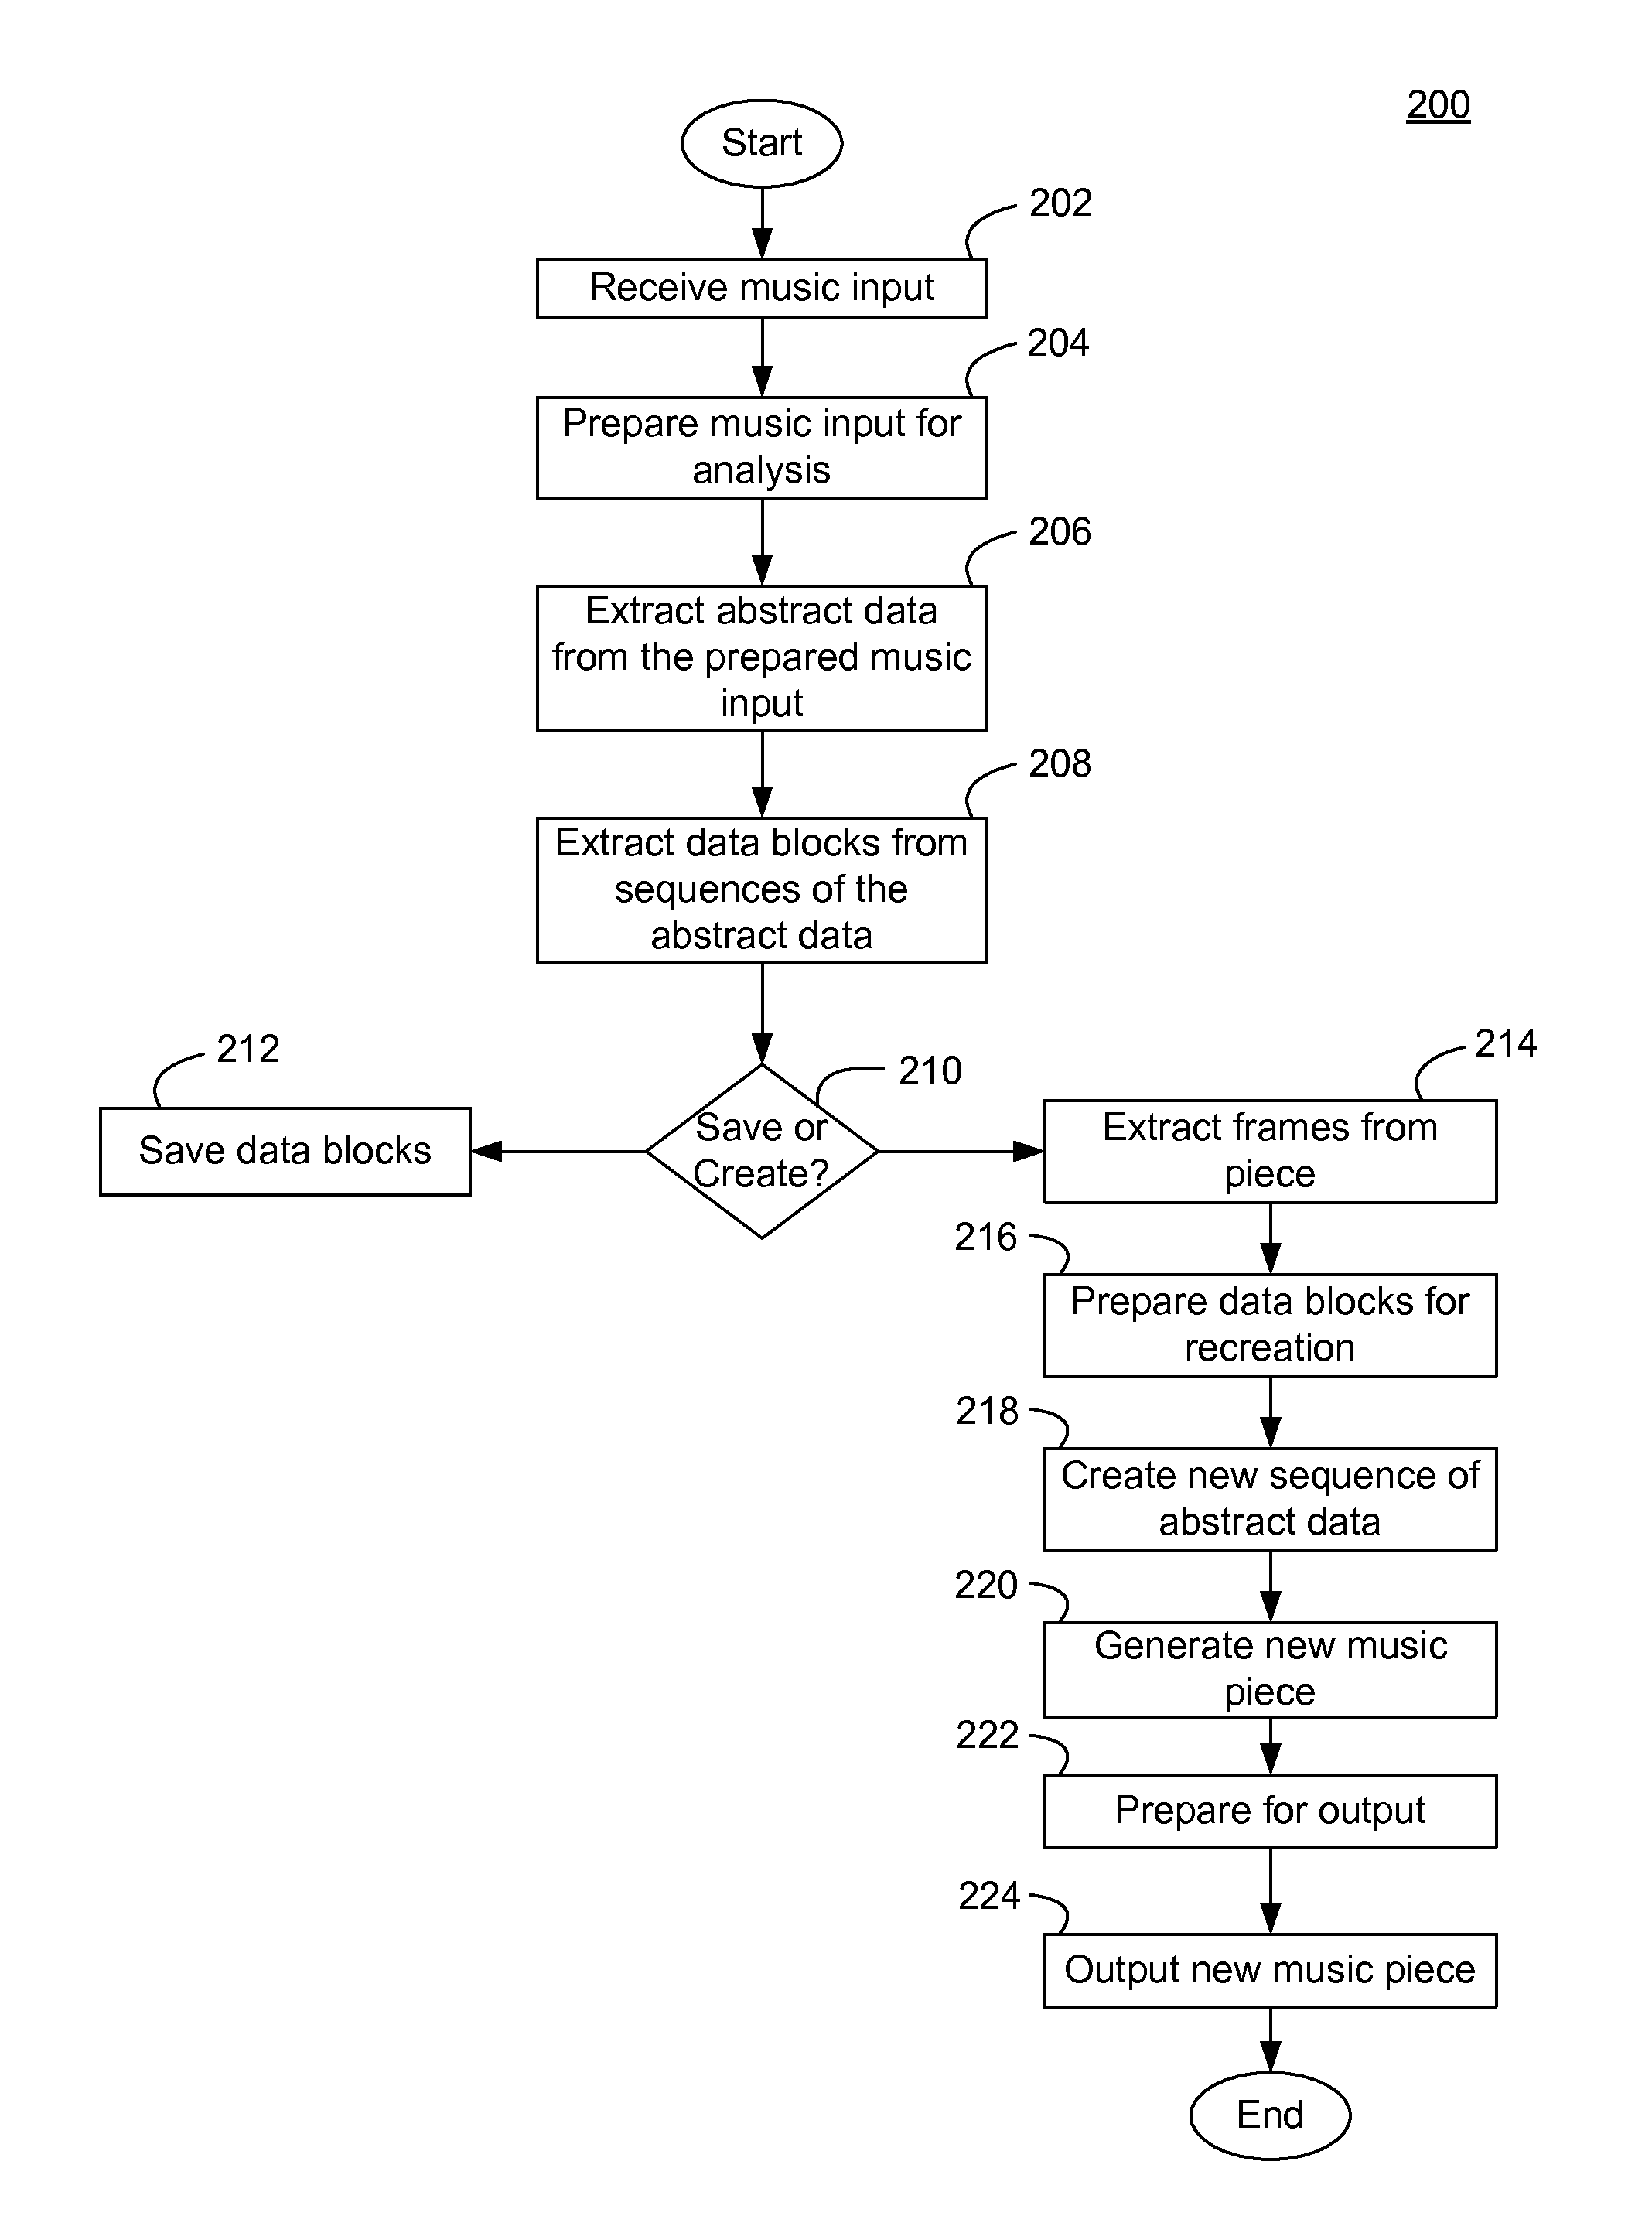 System and method for analysis and creation of music